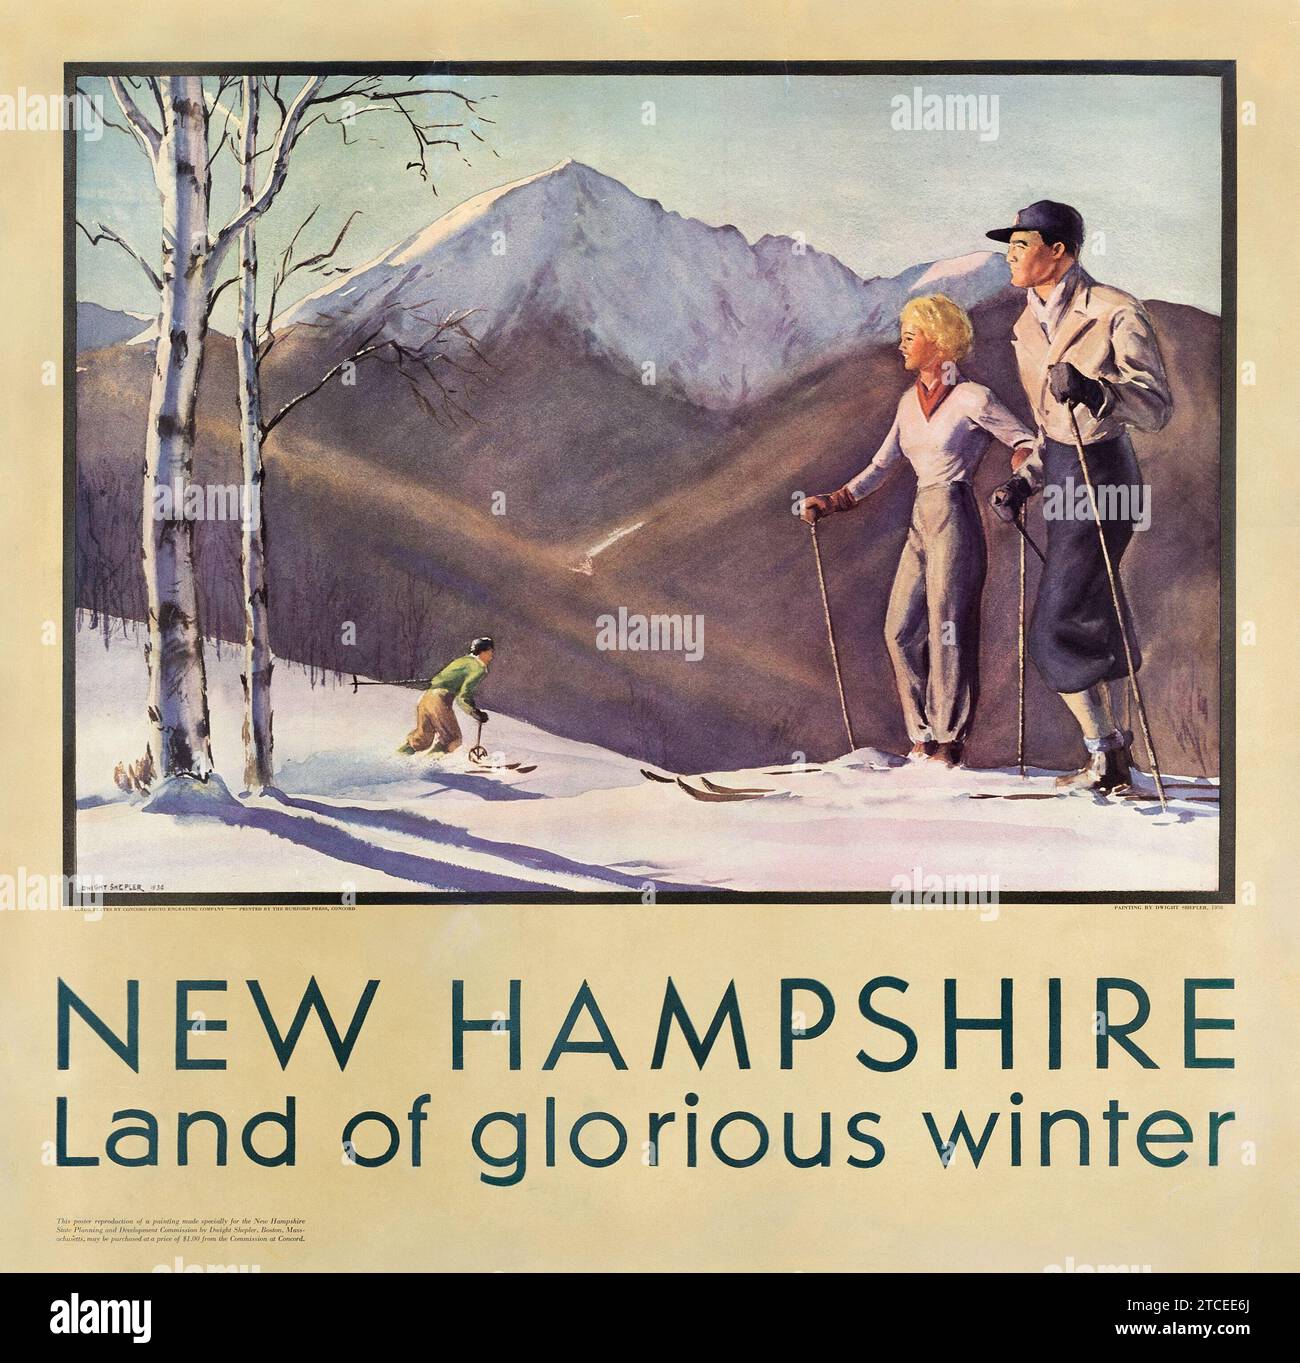 WINTER SPORT - American vintage travel poster - New Hampshire, Land of Glorious Winter (1936). Travel Poster - Dwight Clark Shepler Artwork feat a couple on skis. Stock Photo